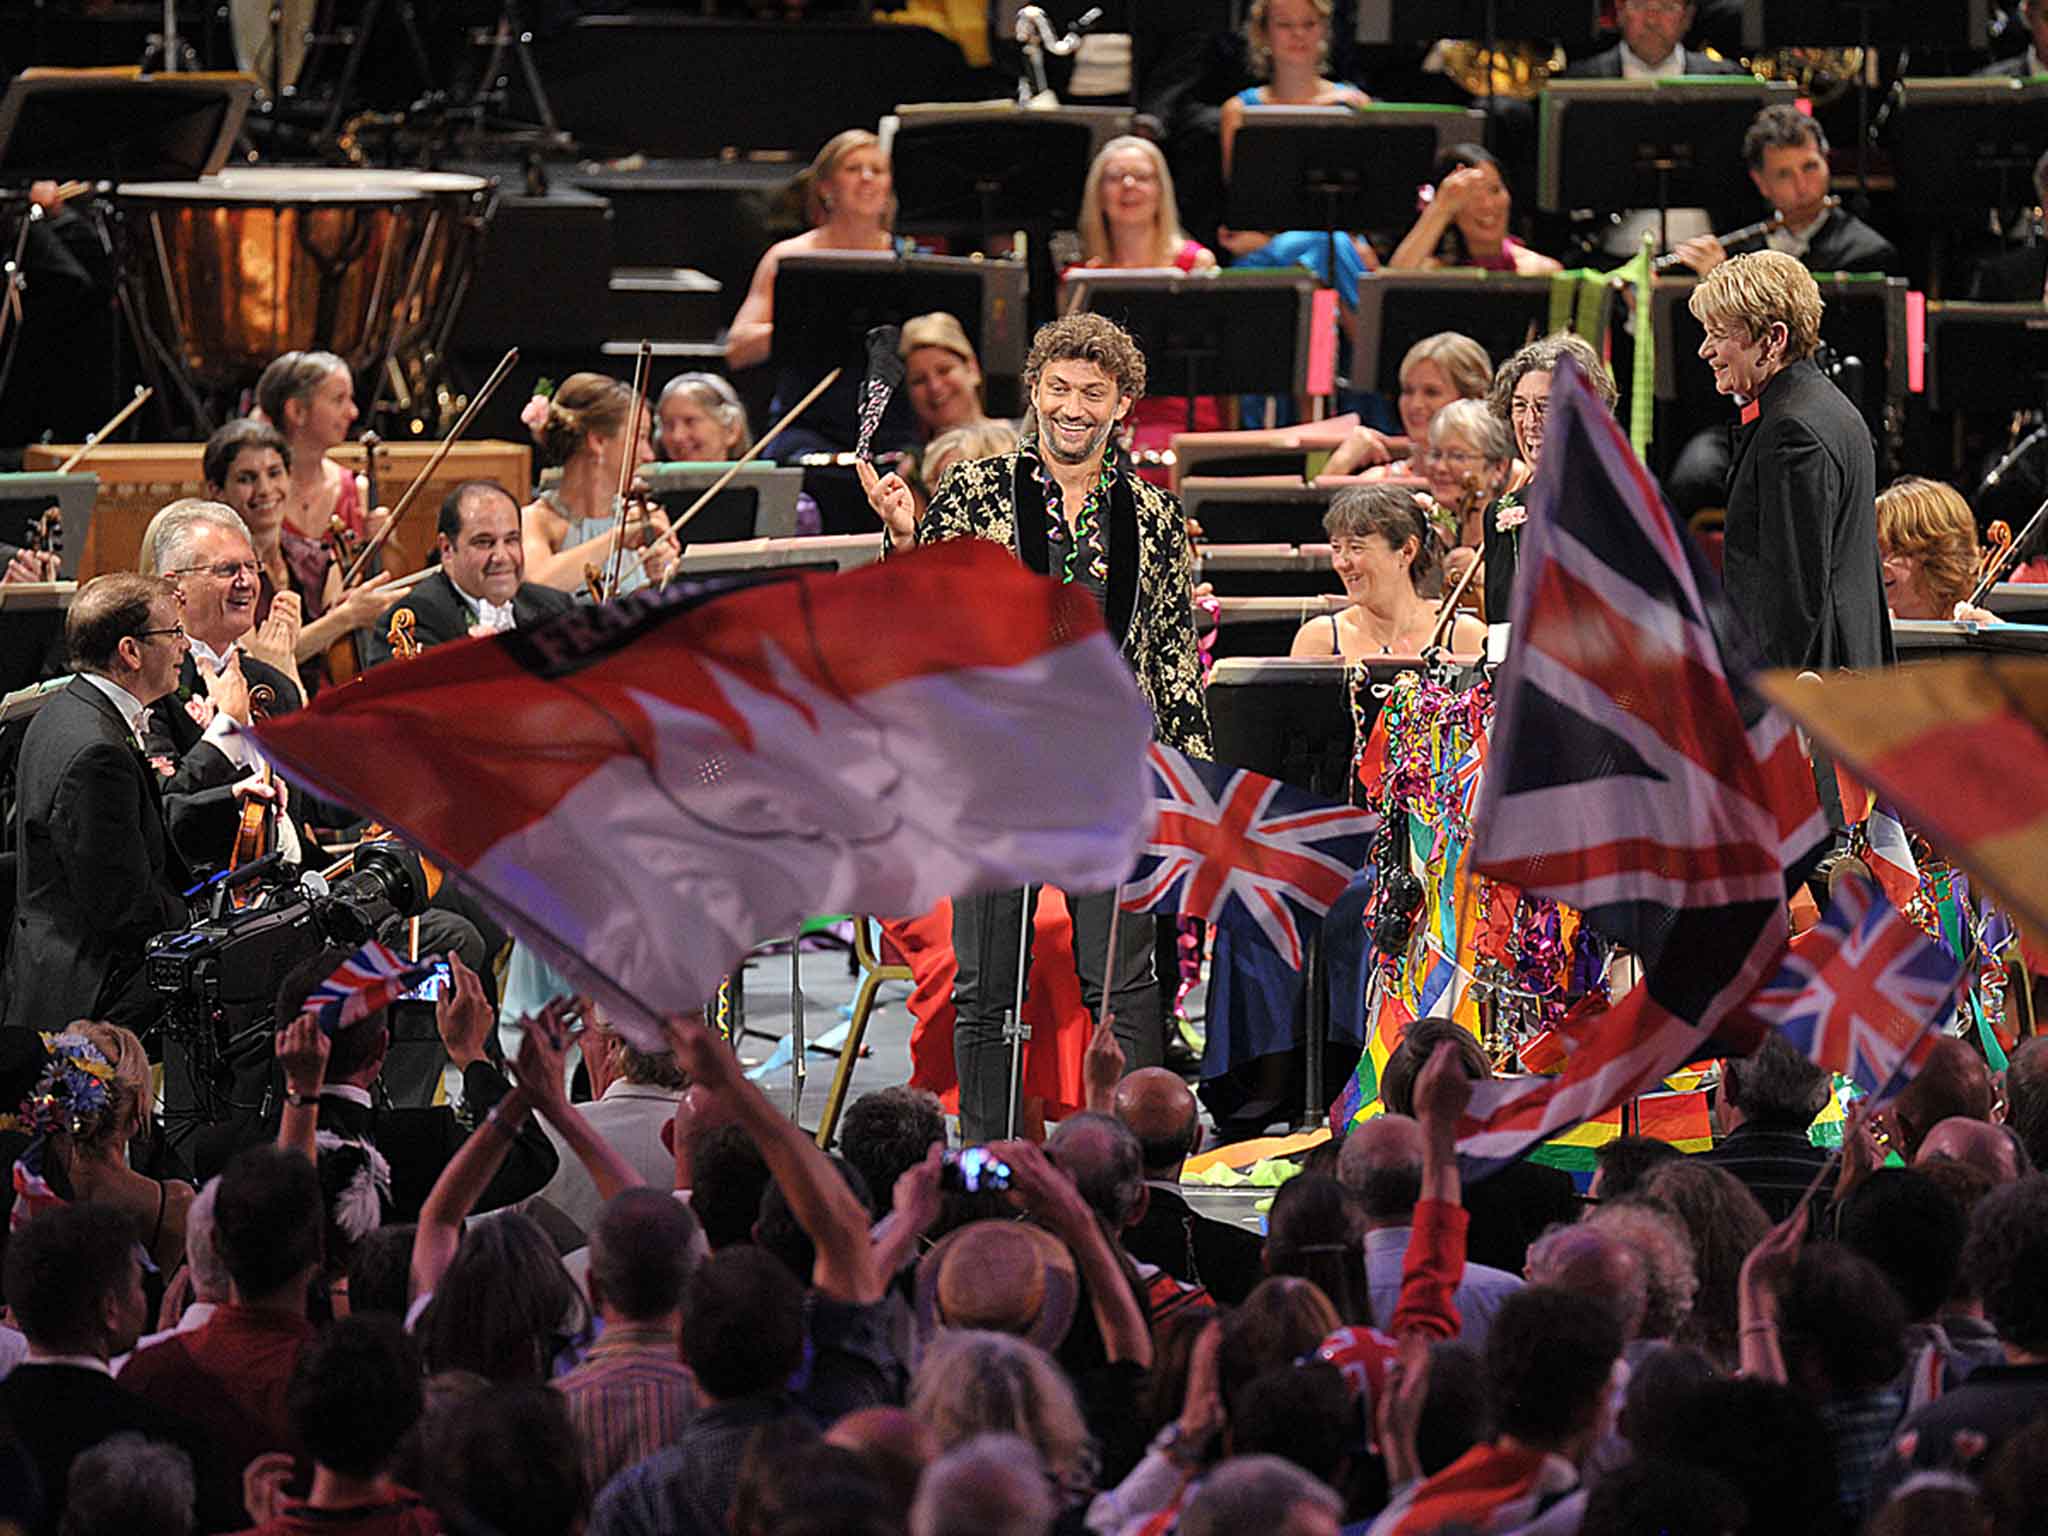 Jonas Kaufmann performs Puccini arias with the BBC Symphony Orchestra conducted by Marin Alsop at the Last Night of the Proms 2015